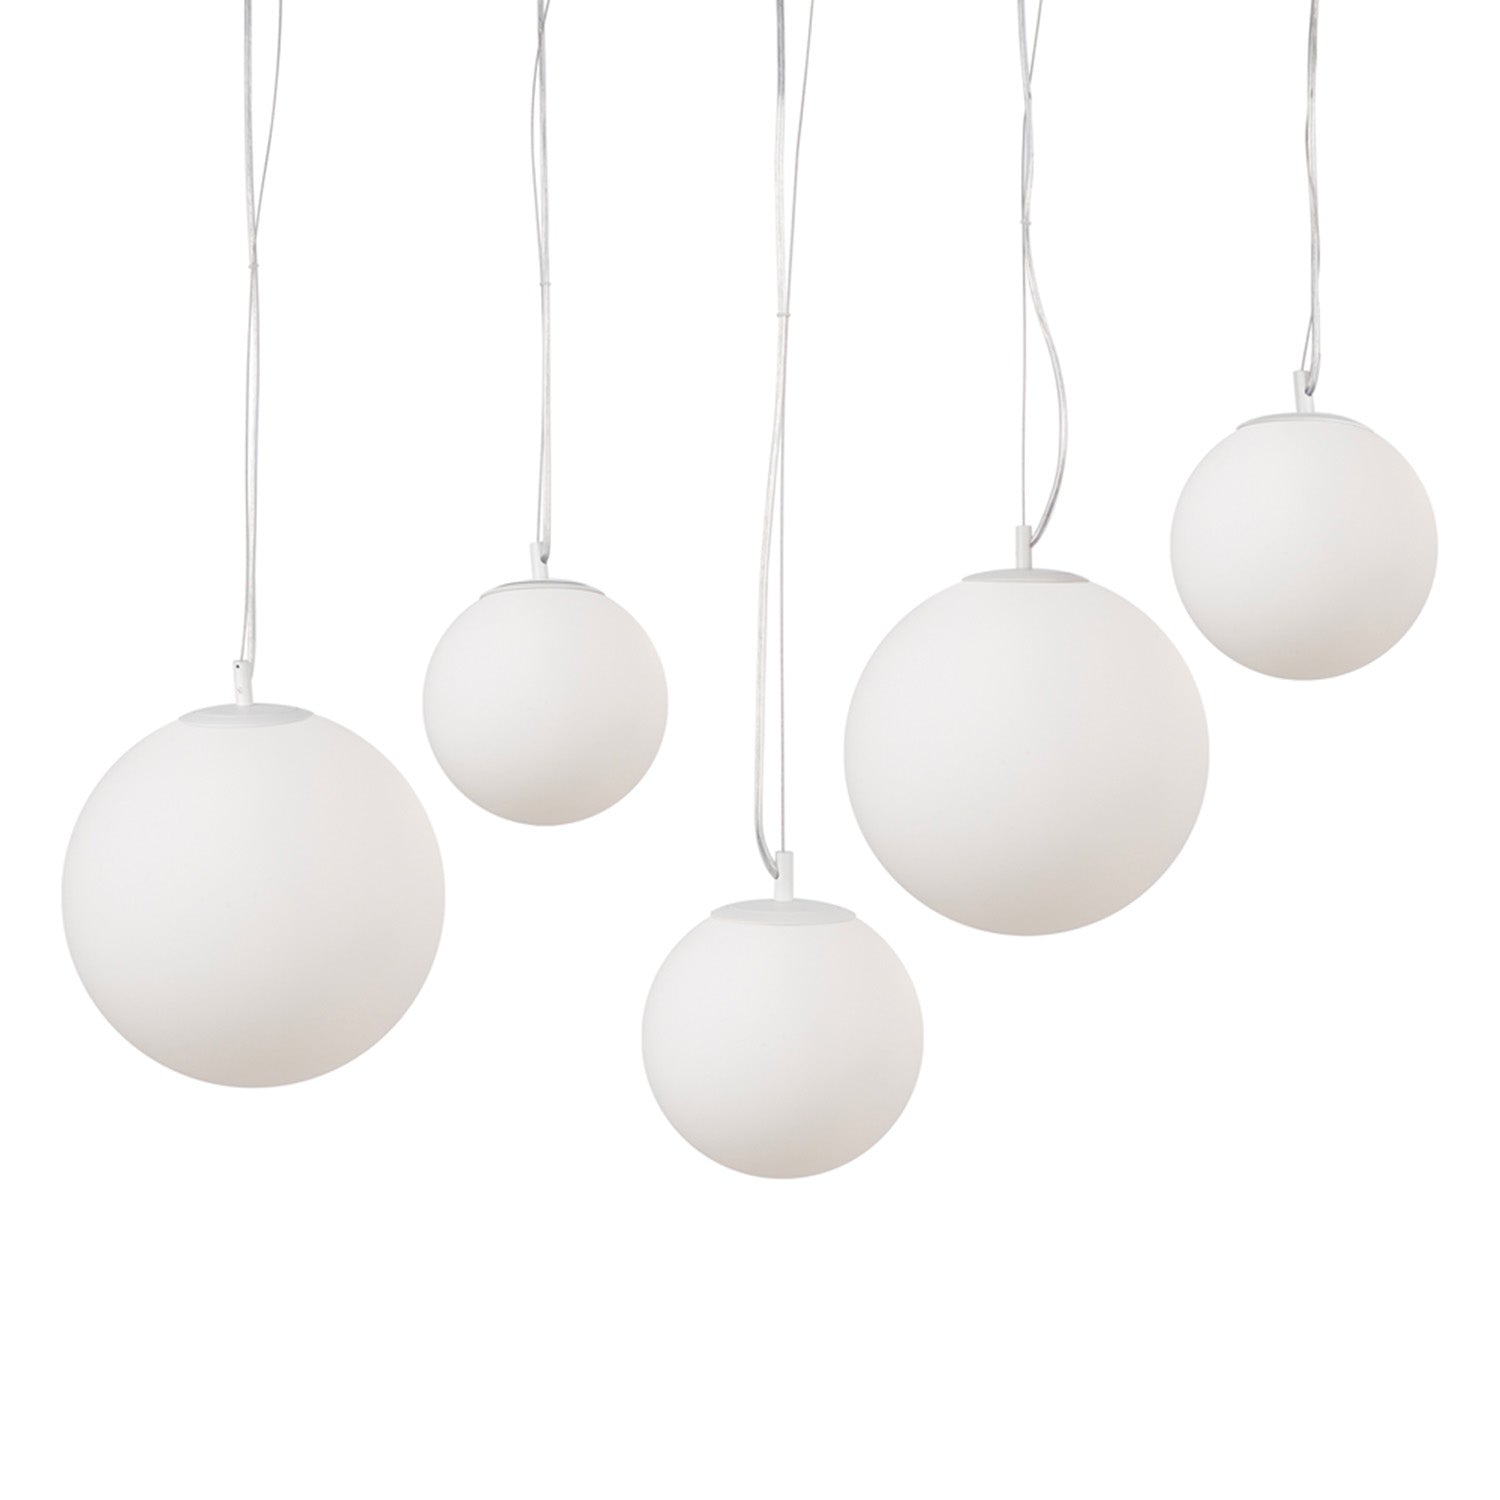 BASIC FORM 5 - 5 globe pendant lamp in oval opaque glass